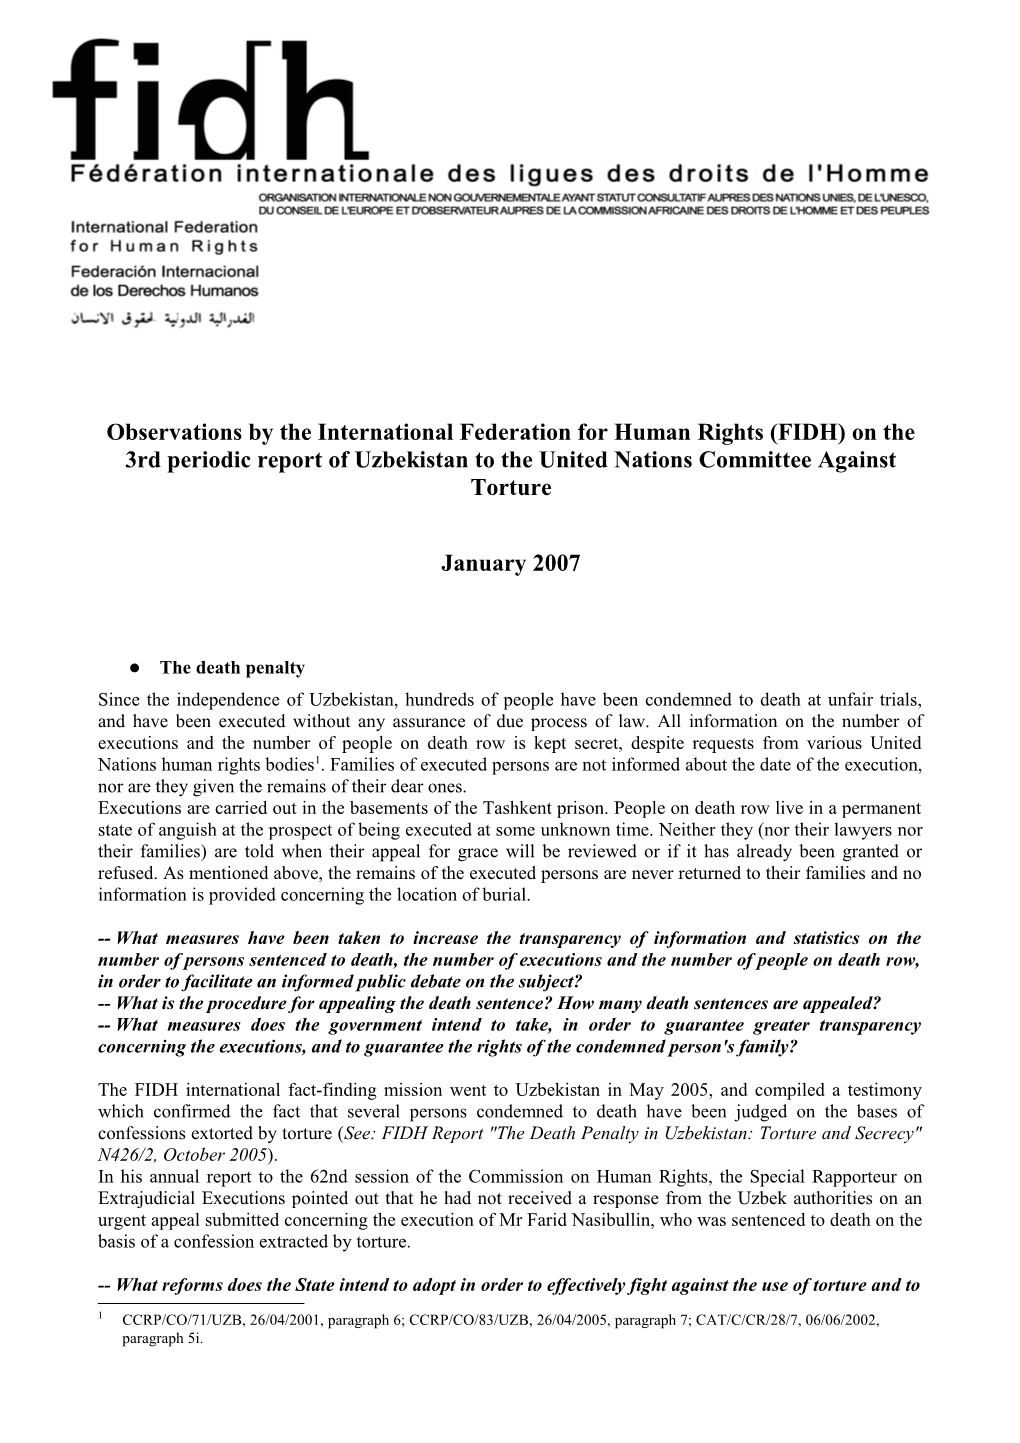 Observations by the International Federation for Human Rights (FIDH) on the 3Rd Periodic